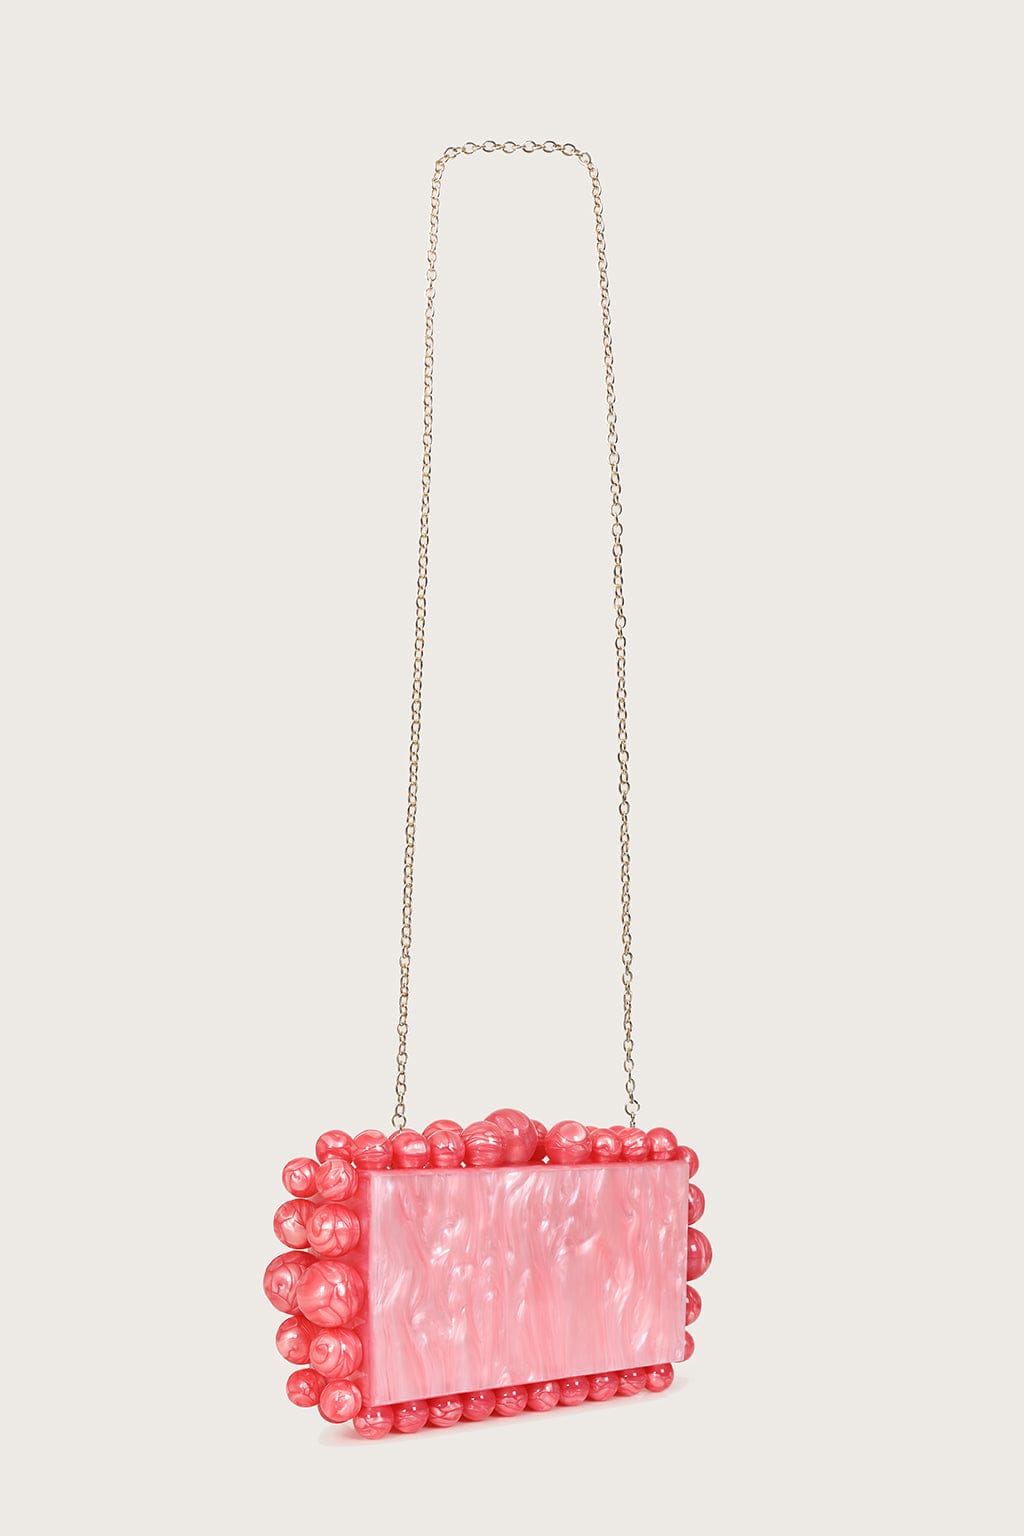 TIA Marbled Faux Pearl Box Clutch Bag in Pink